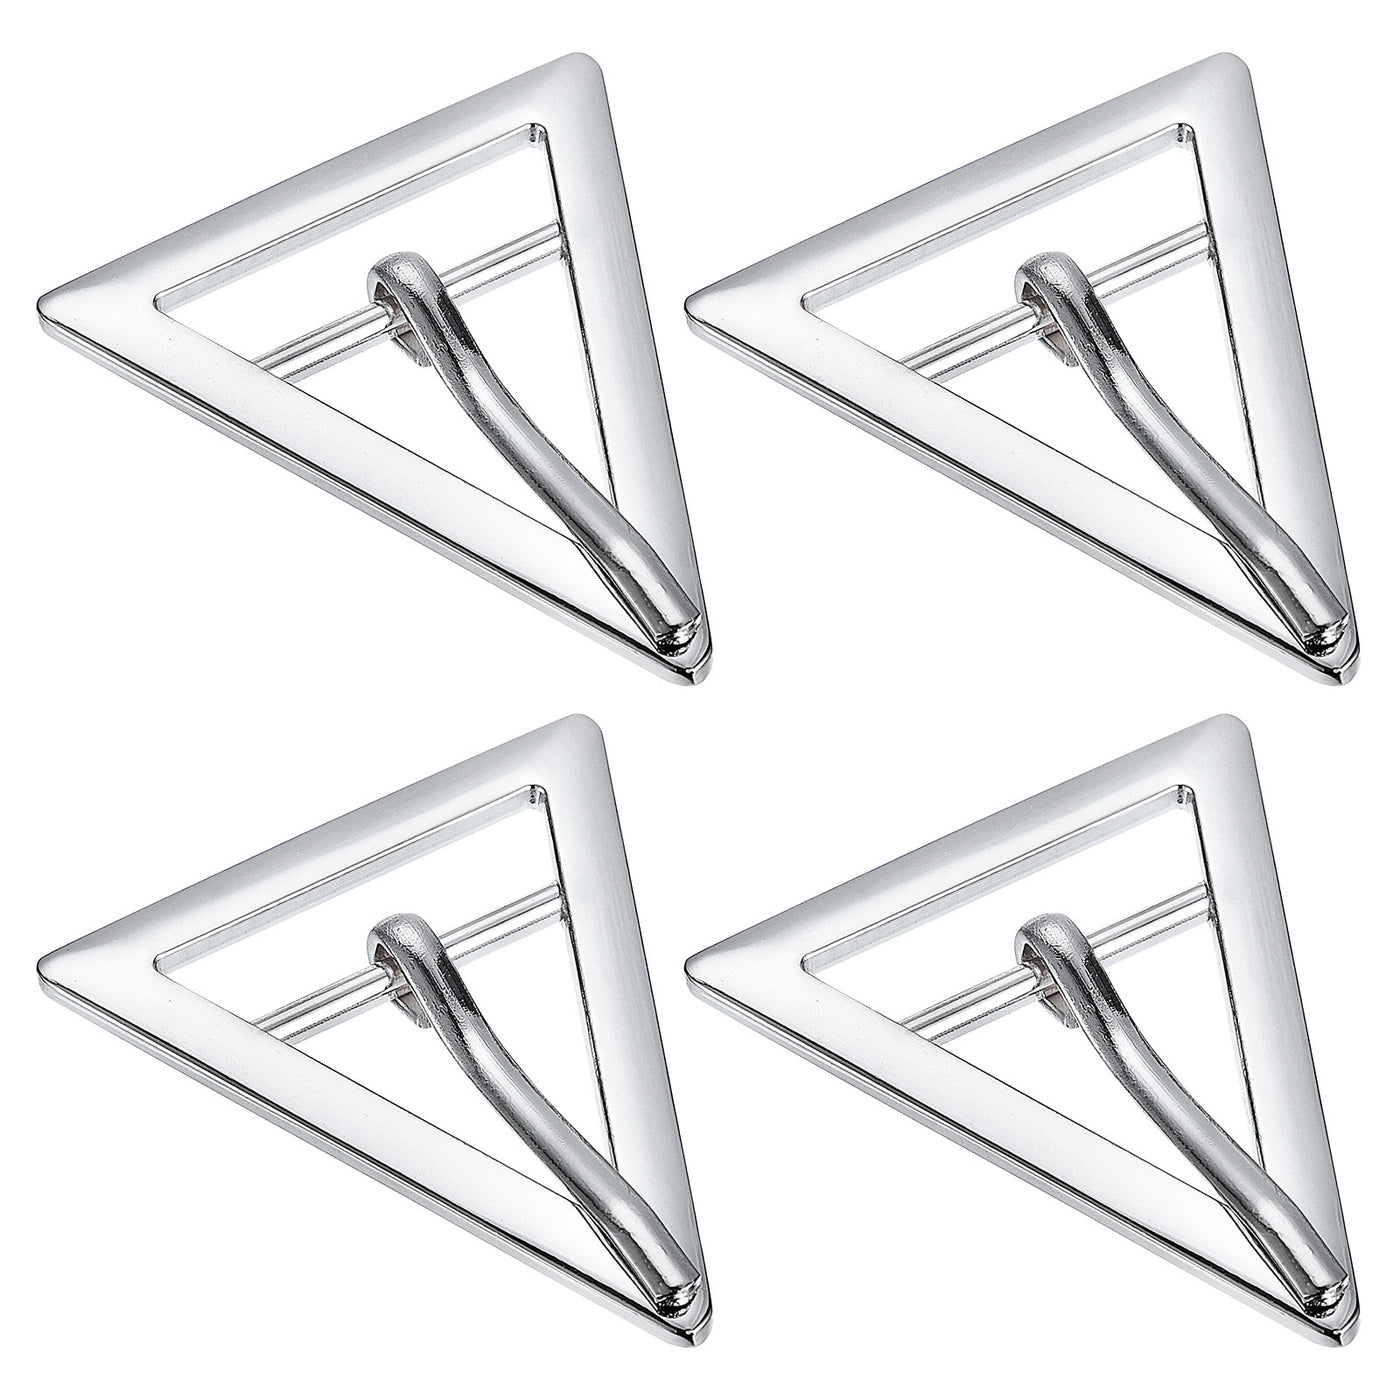 uxcell Uxcell 4Pcs 1.06" Single Prong Belt Buckle Triangle Center Bar Buckles for Belt, White